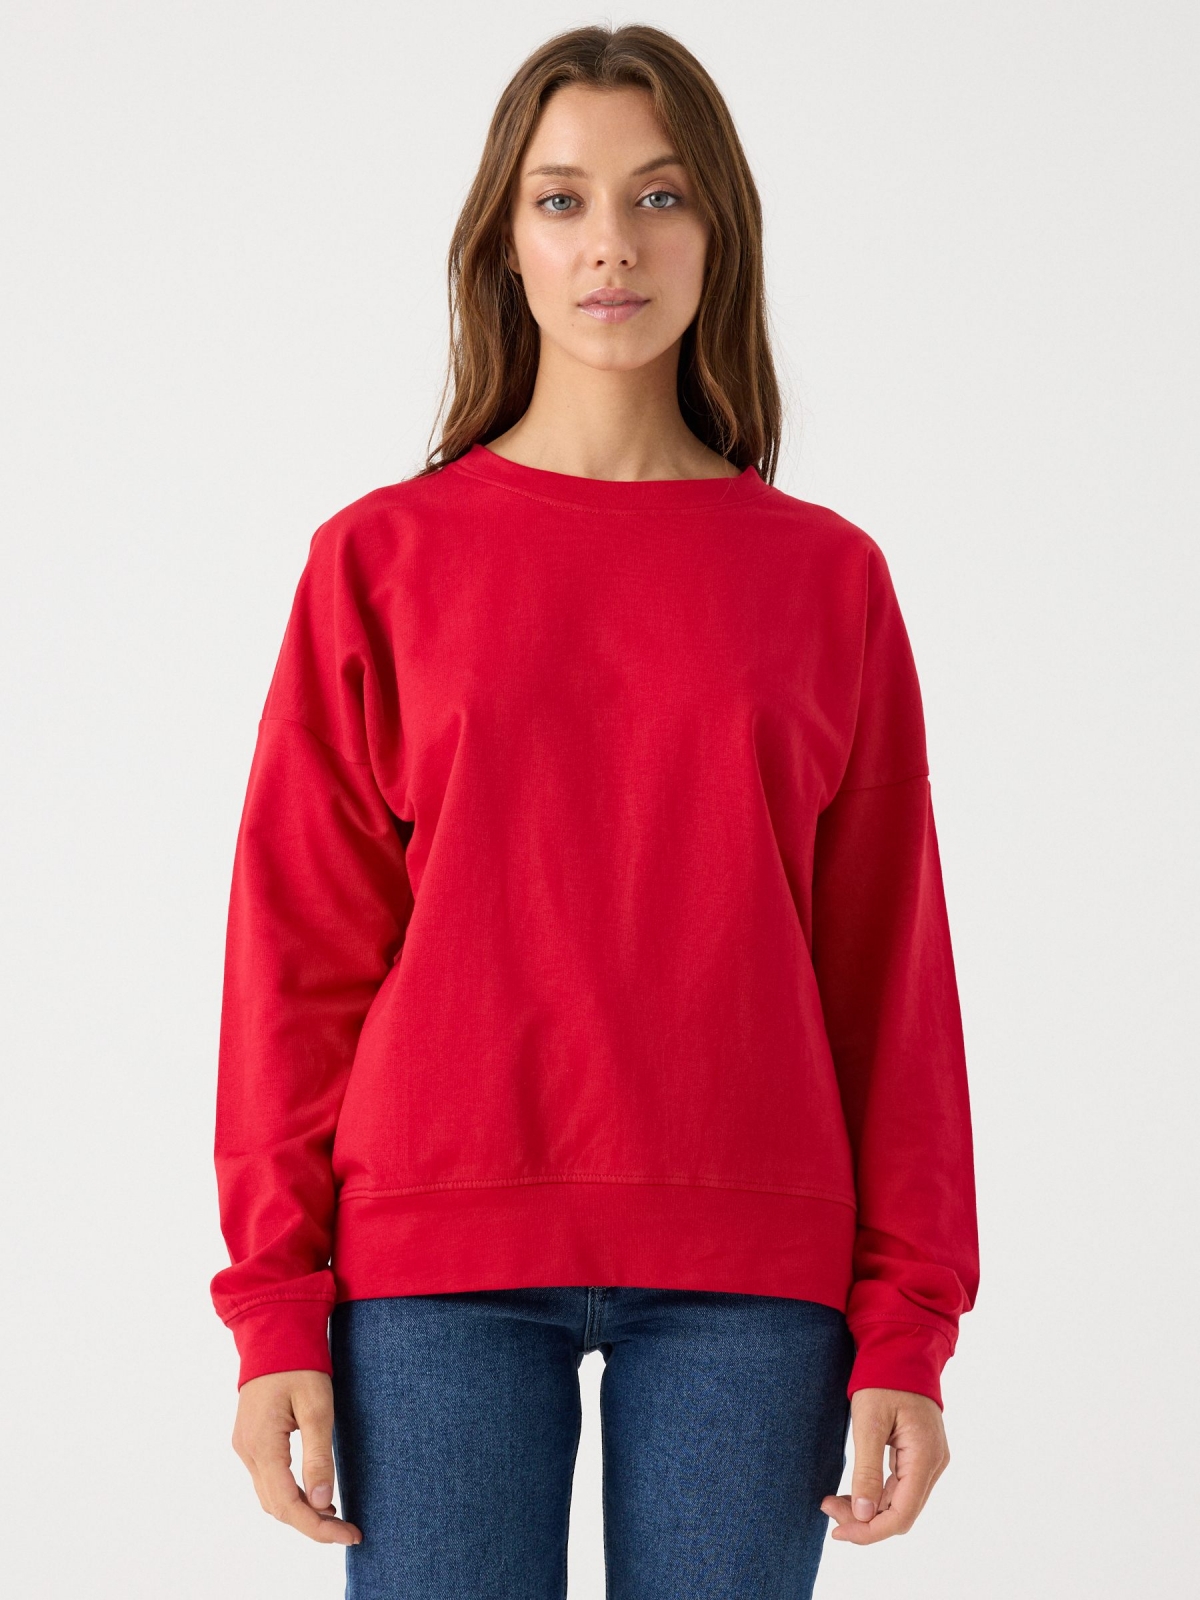 Basic round neck sweatshirt red middle front view